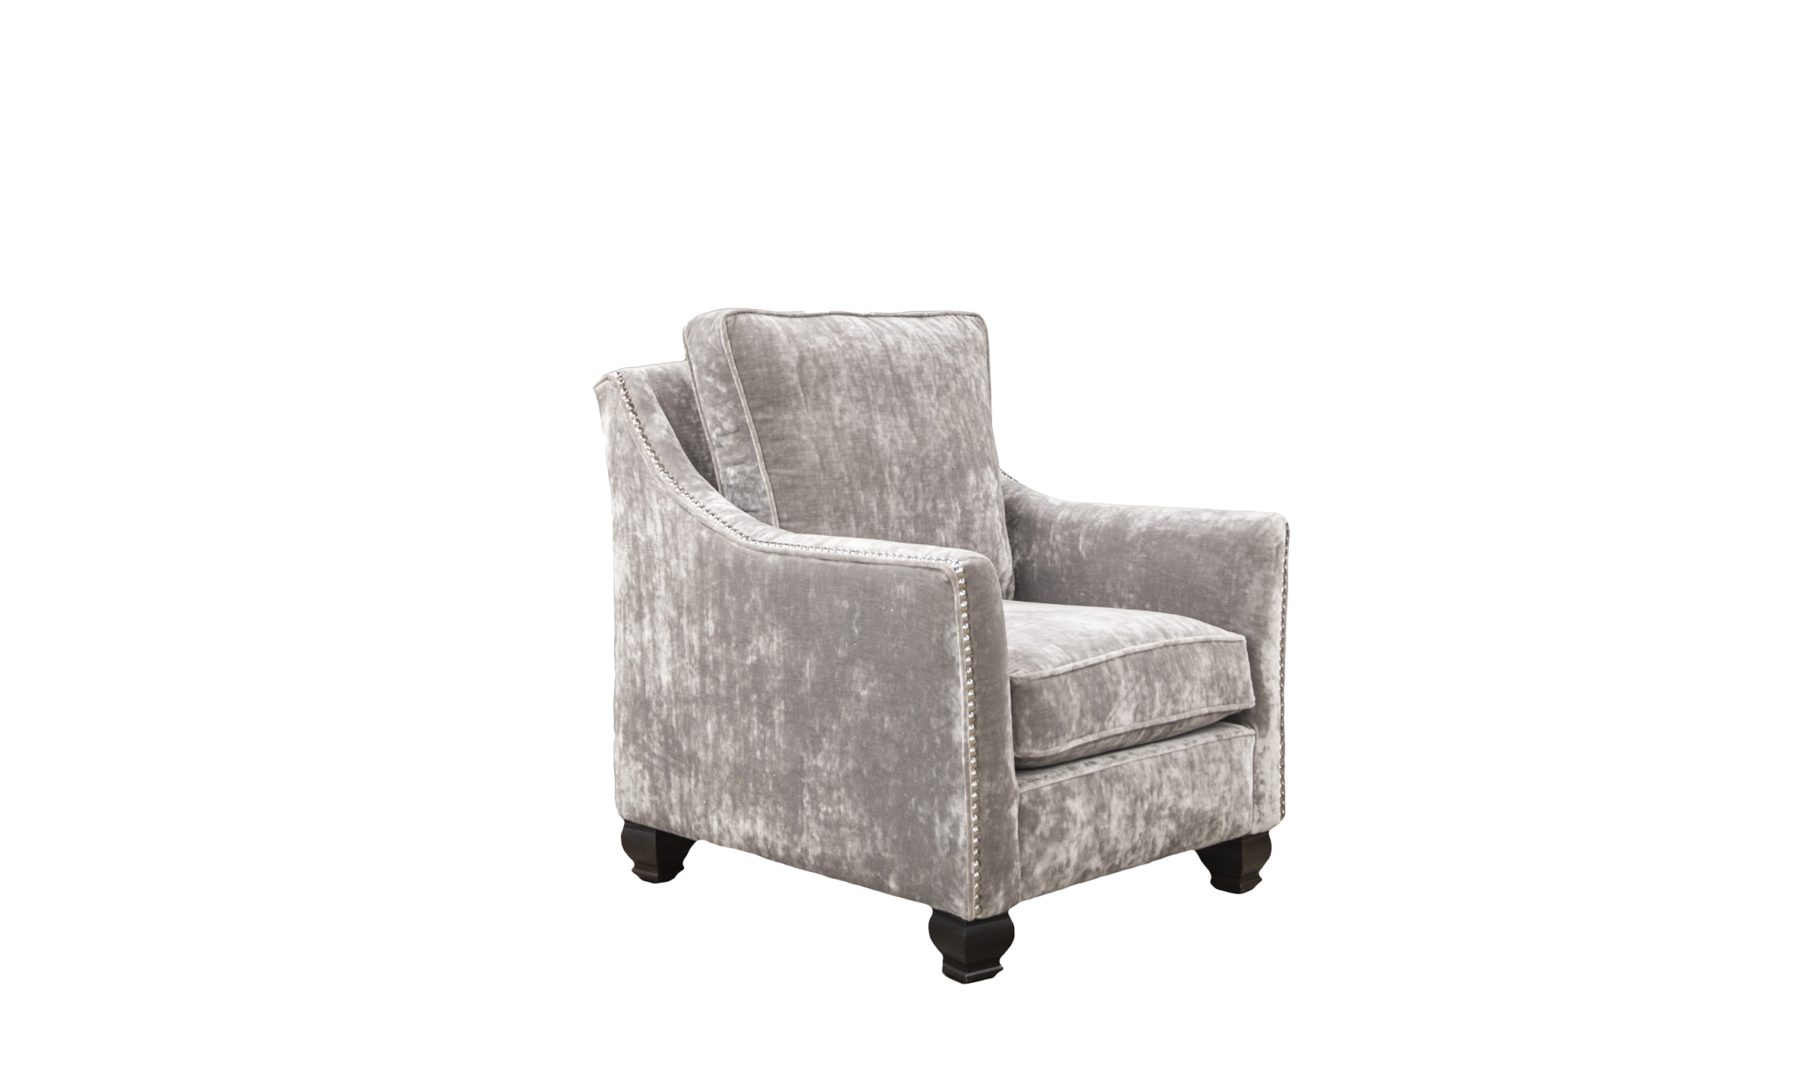 Grenoble Chair in Boulder Silver